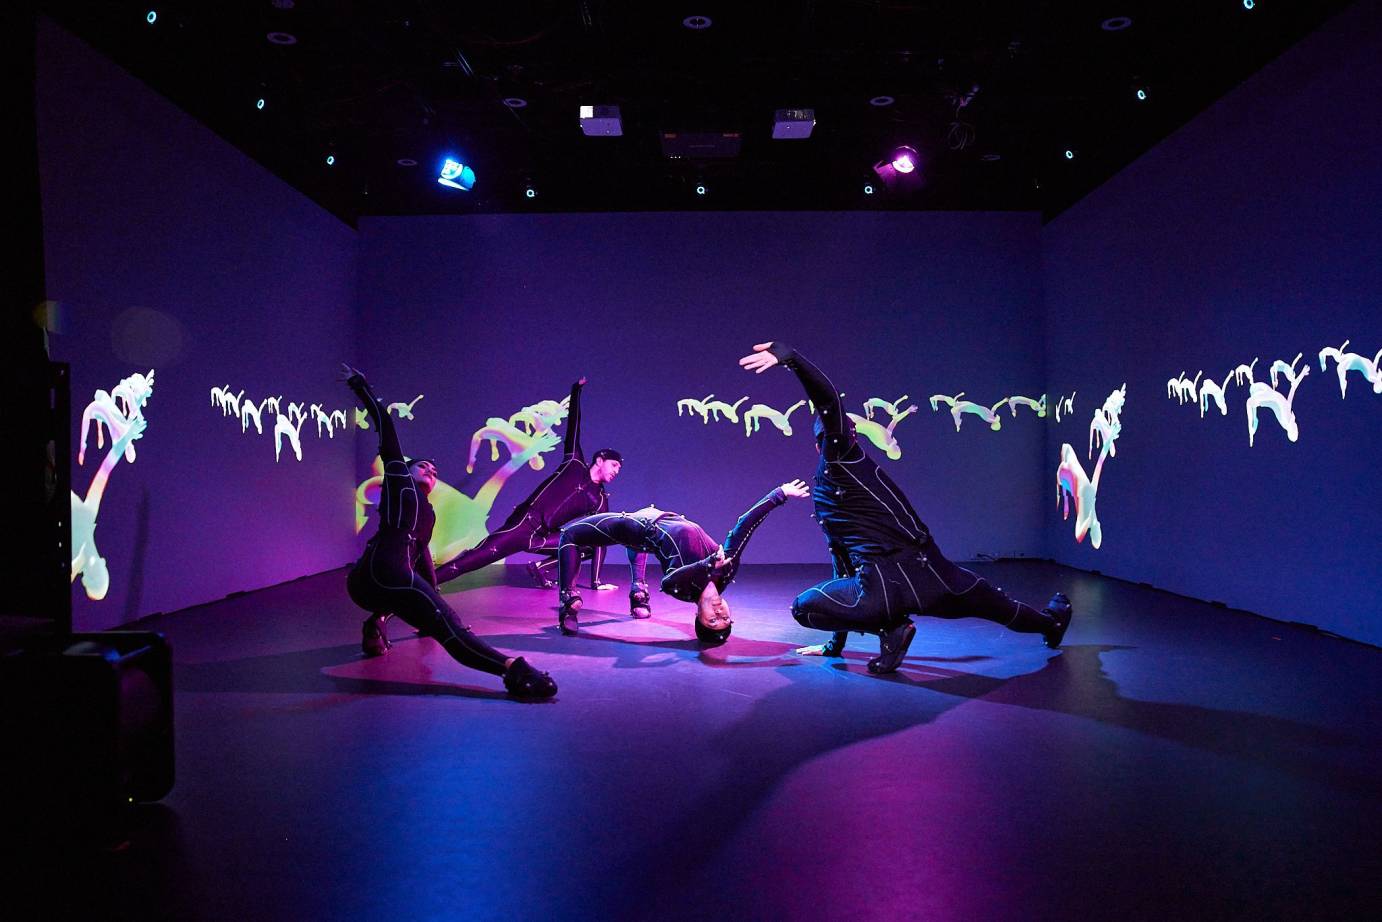 Three dancers in black, low to the ground with one leg bent and the other extended, surround a dancer in the center performing a backbend. The dancers' images, transformed into little meme-like figures, are projected on the purple wall. 